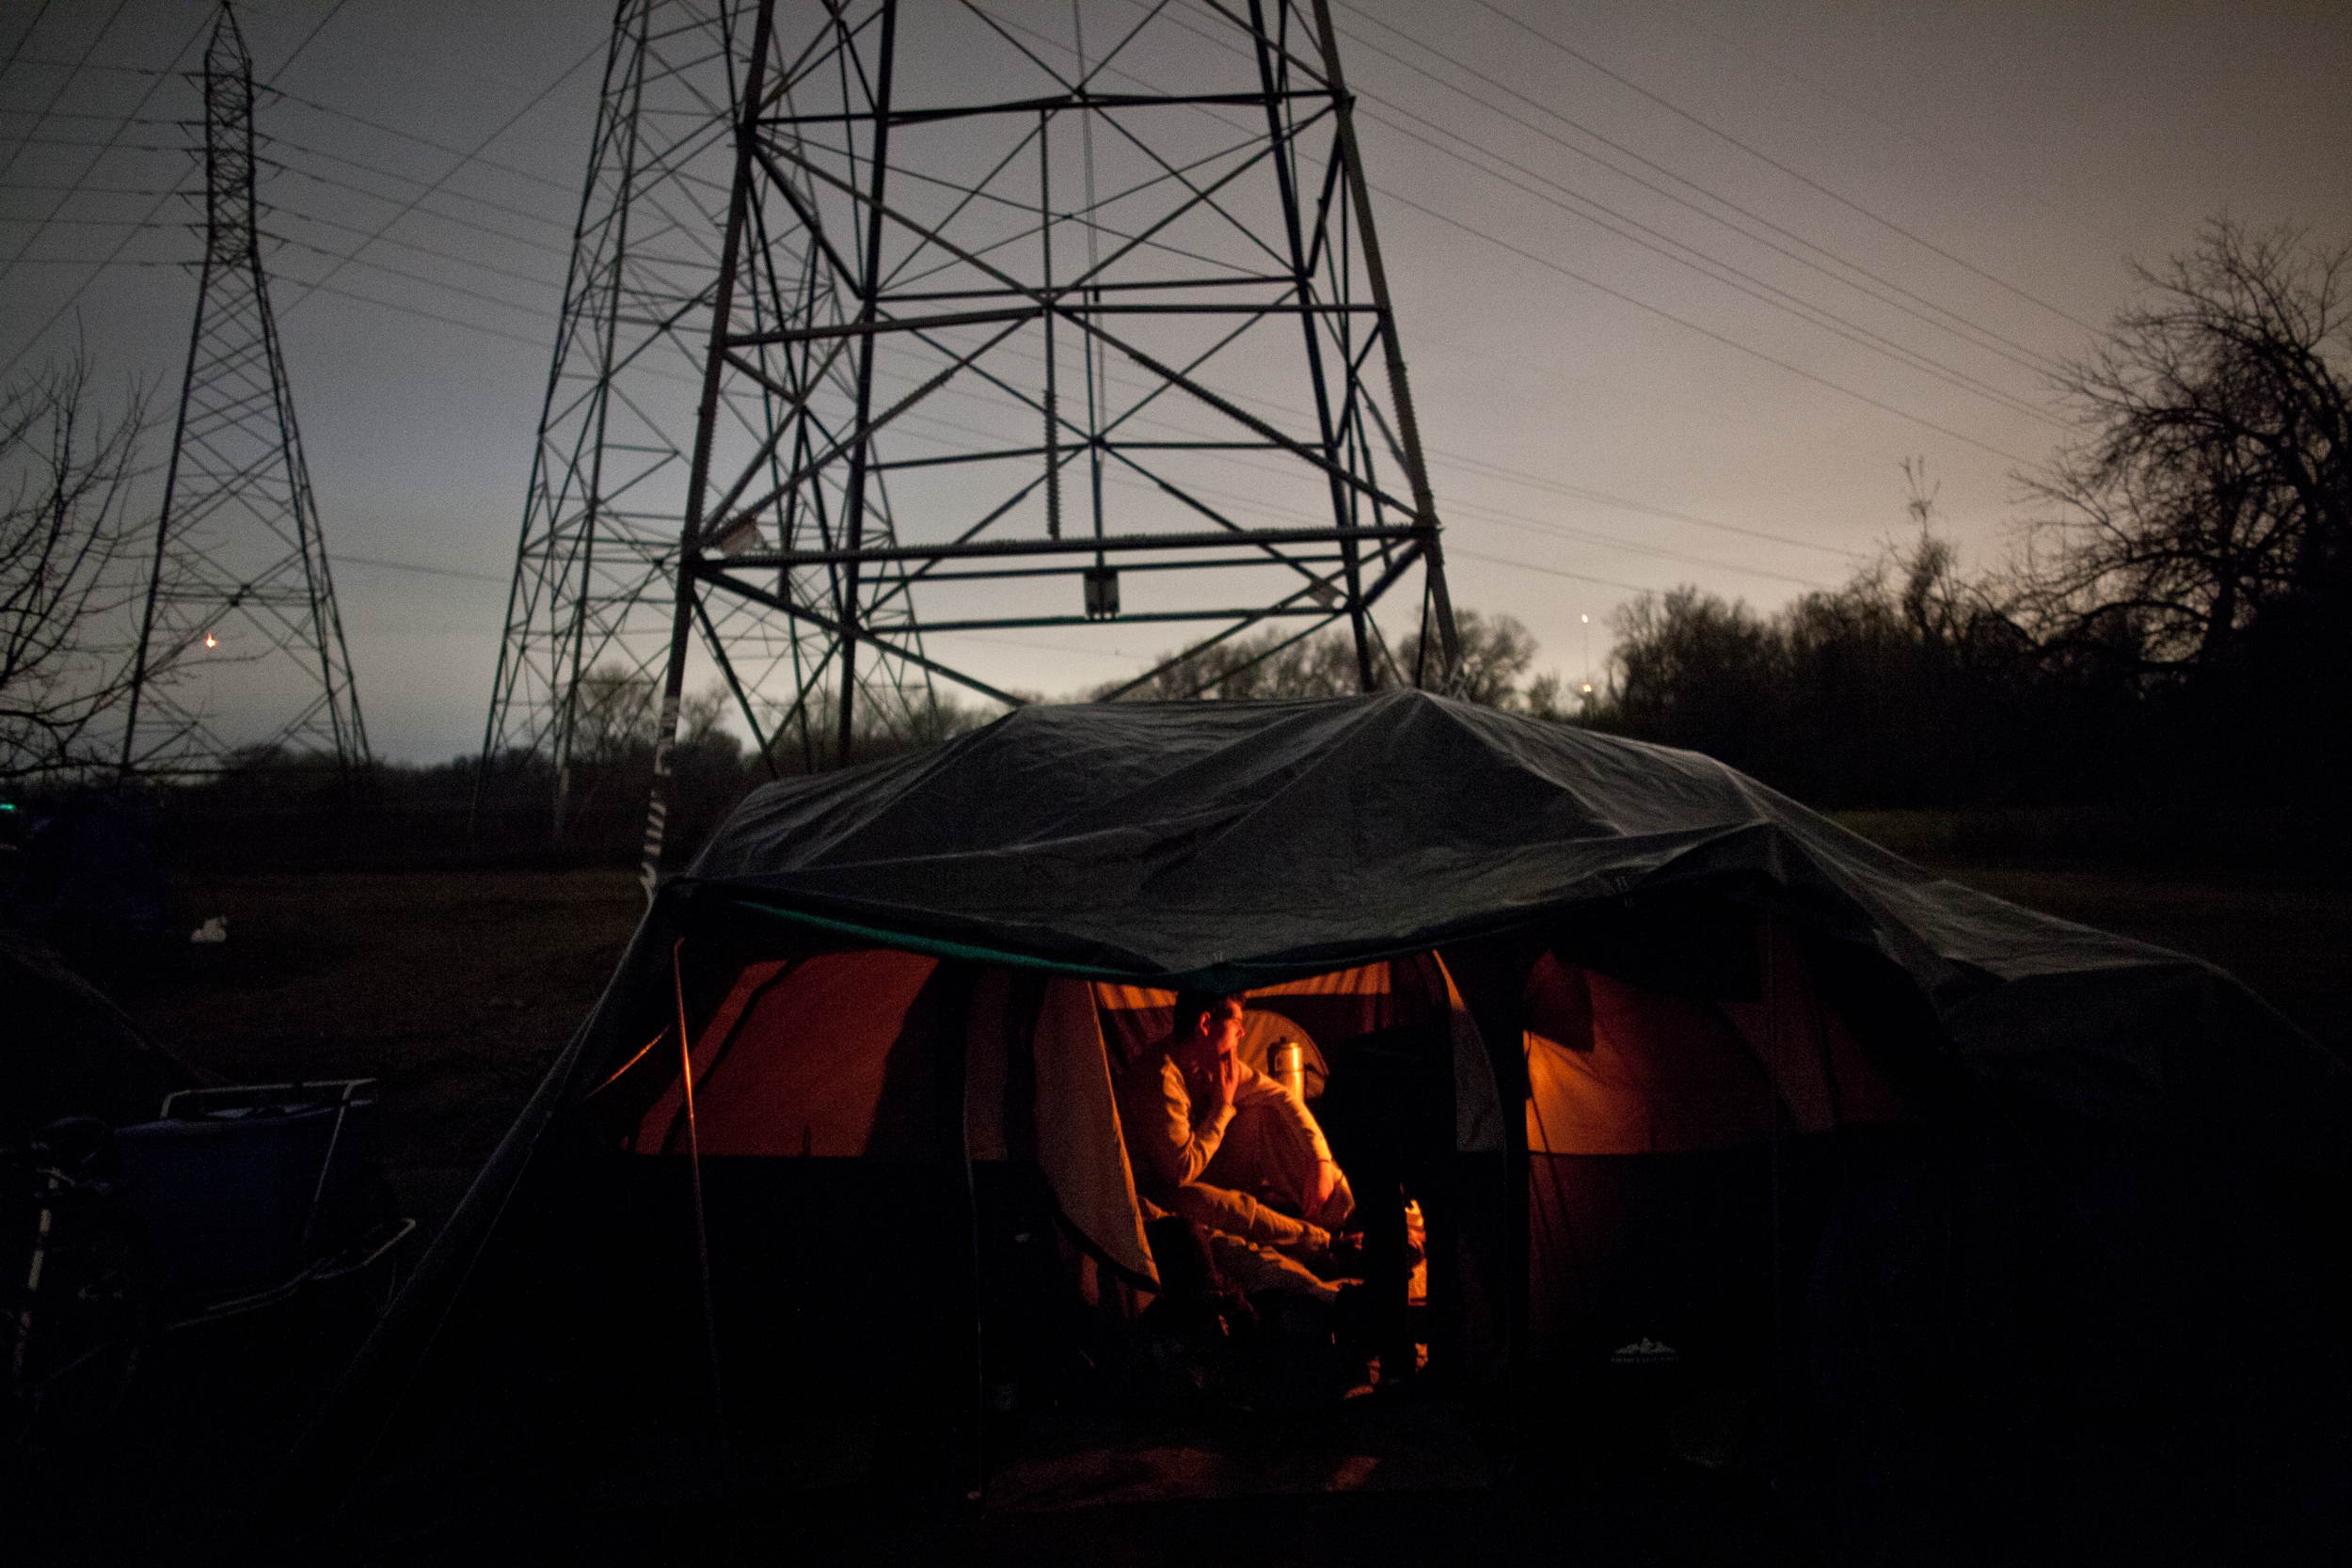  Campers stay warm in a tent heated by a propane burner at the SafeGround homeless tent camp in Sacramento, California. 